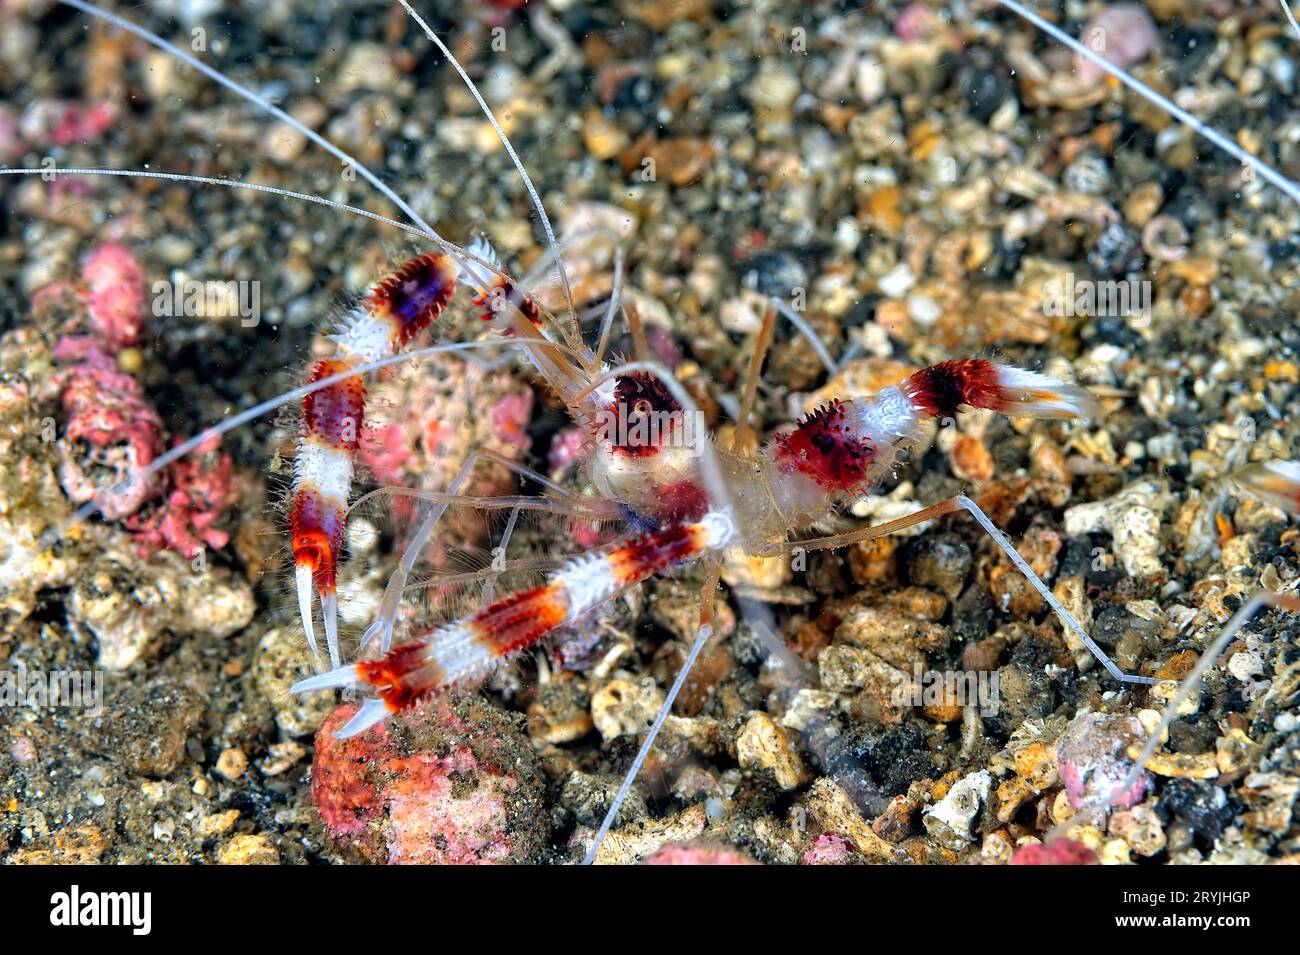 A picture of a banded coral shrimp Stock Photo